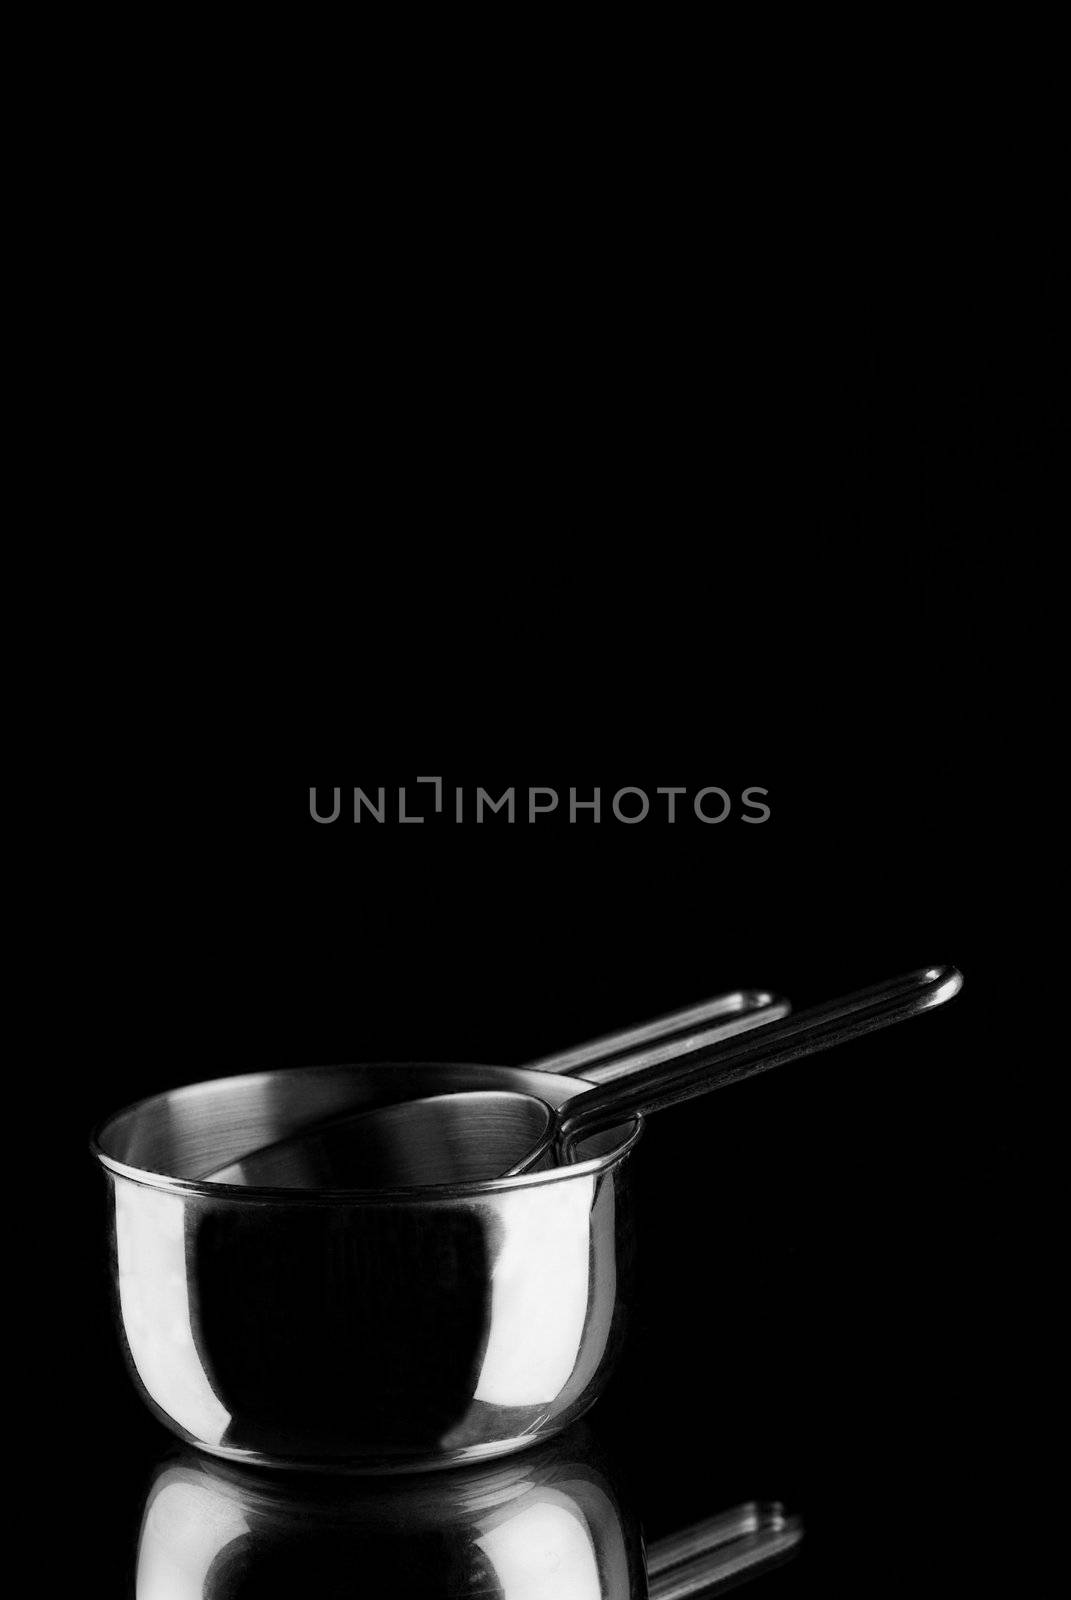 Stainless steel measuring cups on mirror with balck background